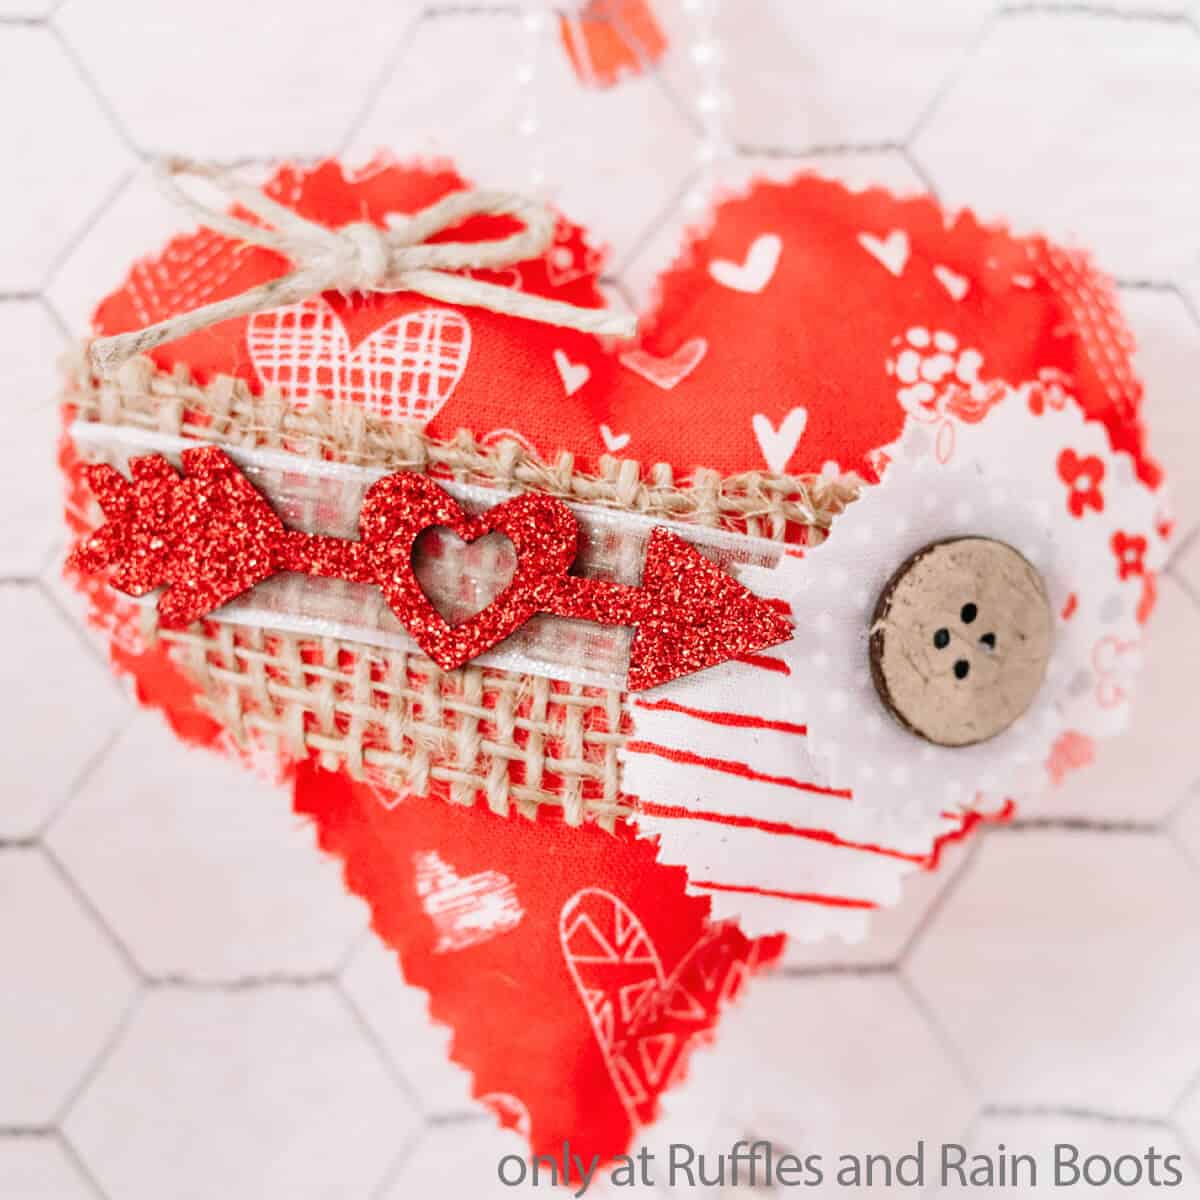 no-sew valentines heart ornaments close up with text which reads only at ruffles and rain boots.